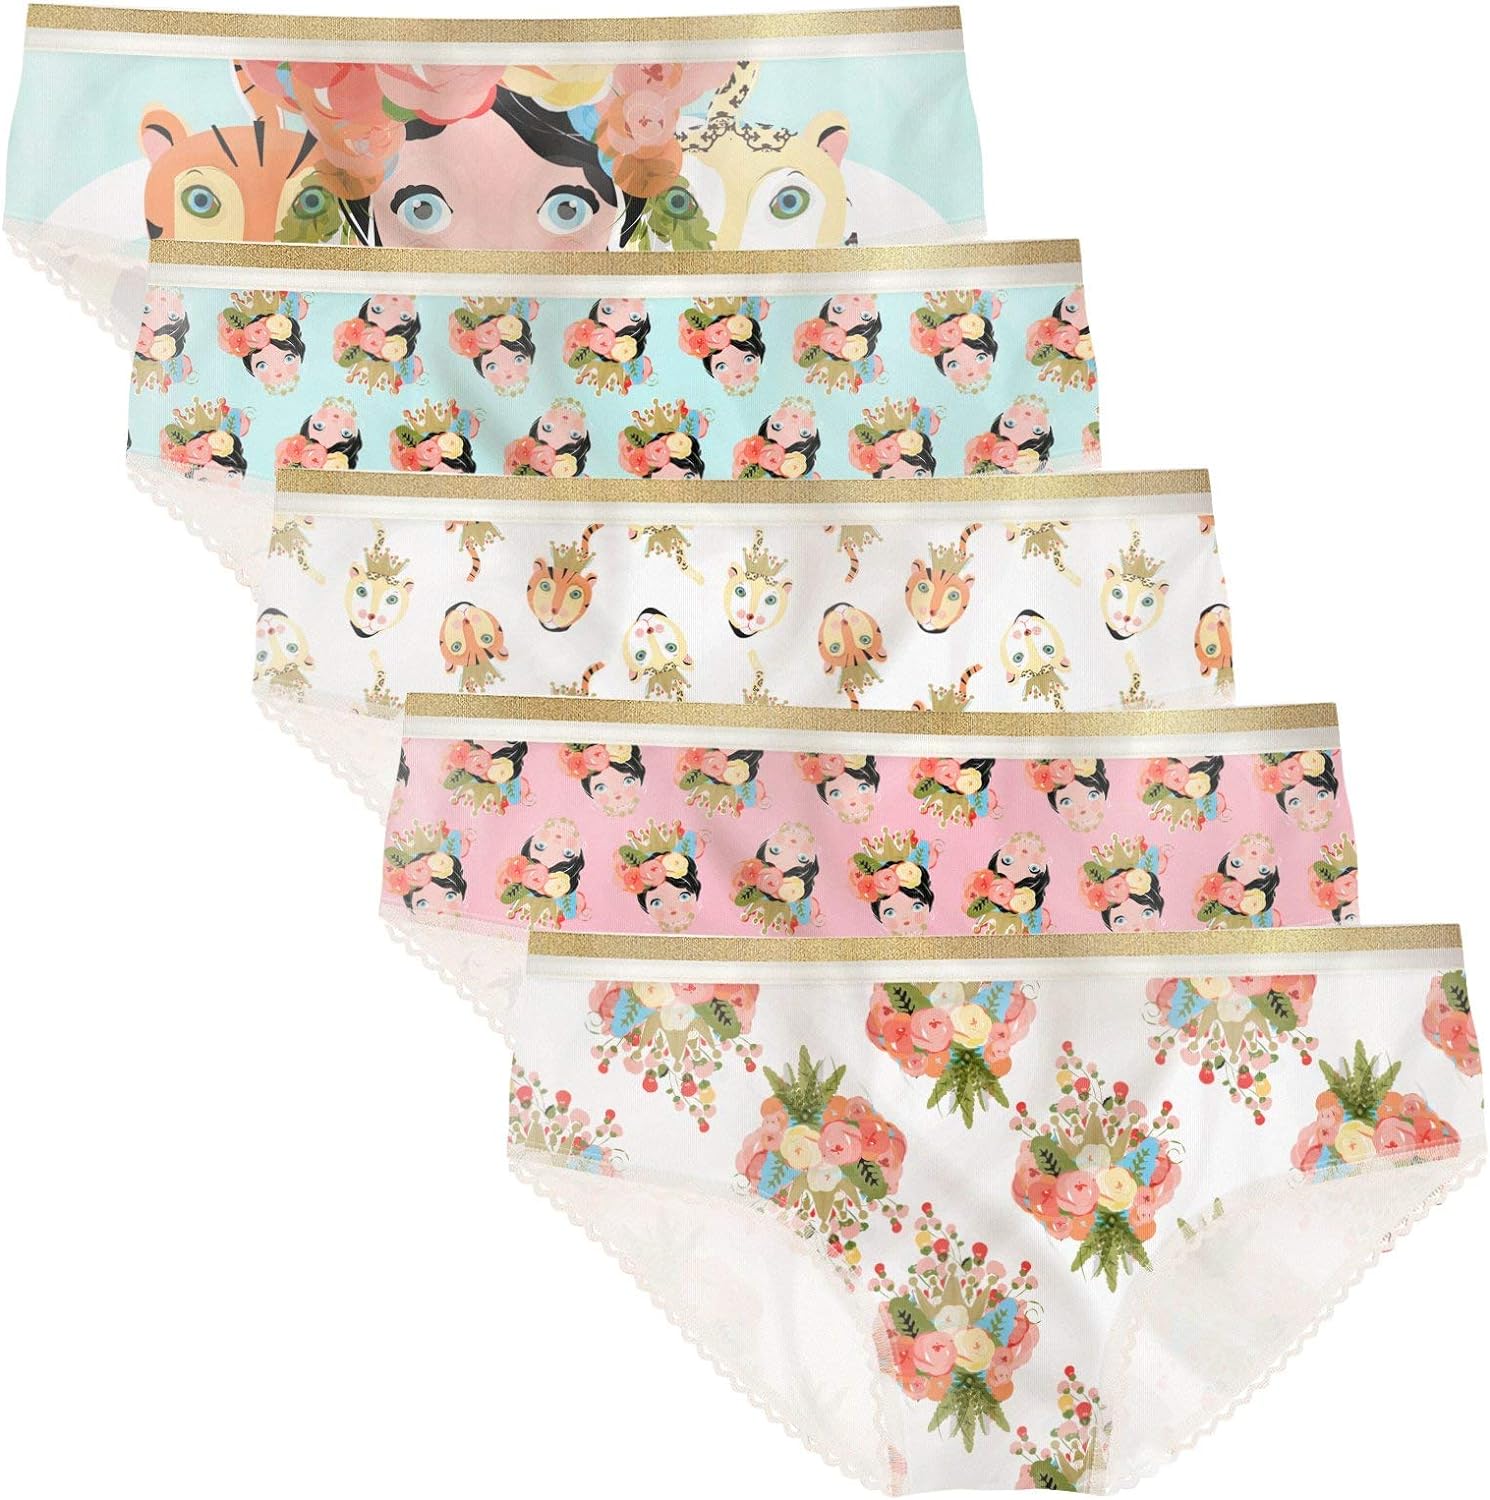 panties for my son